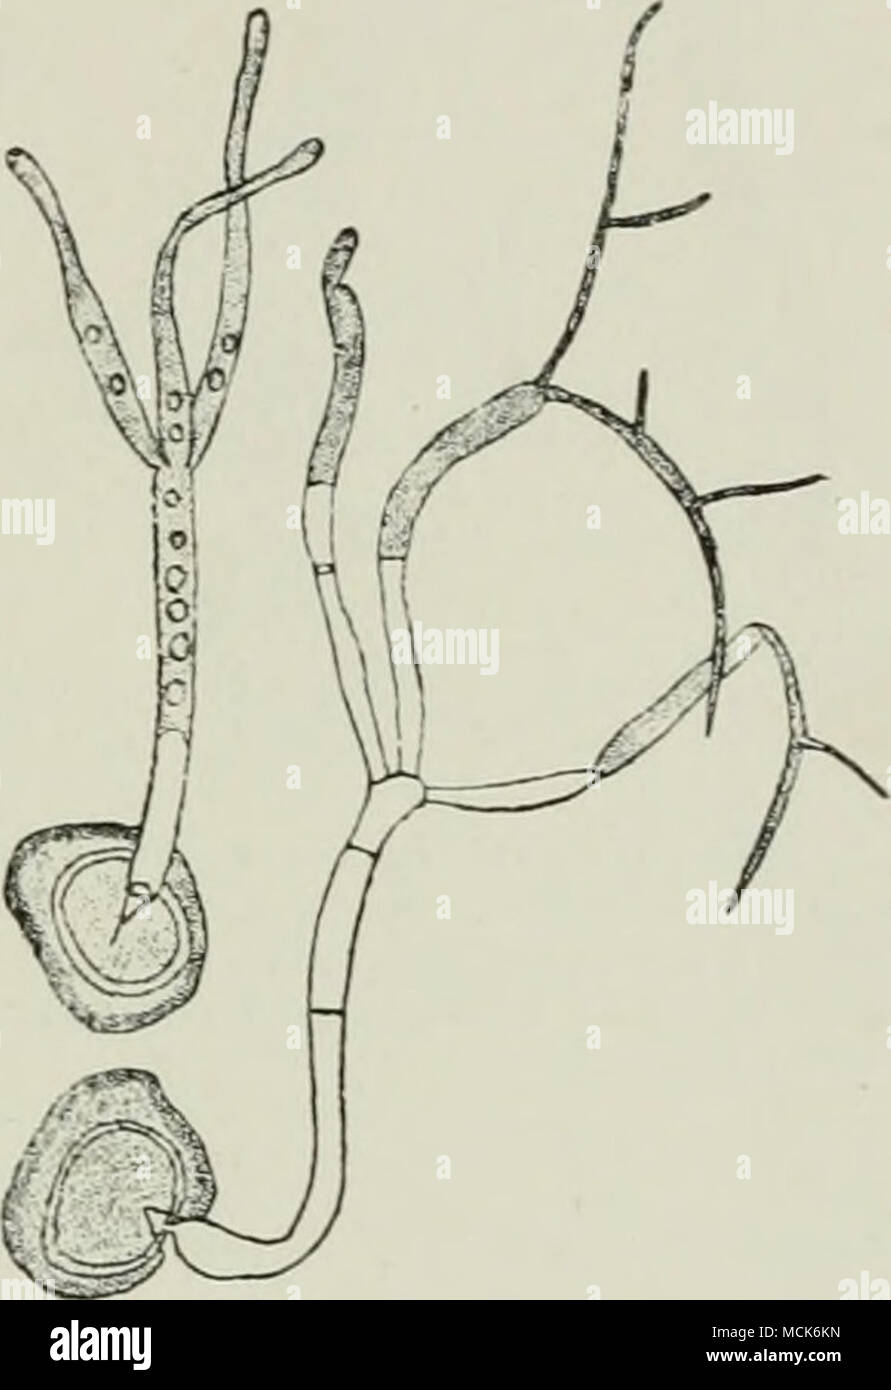 . Fig. 170.—Entytoiua Magnusii. Germin- ated spores; the promycelium of one shows a whorl of three branches with apices elongating to fonn germ-tubes; the other shows two, out of three, germ-tubes giving off branched sporidia (conidia). (After Woronin.) E. leproidum Trab.'- Oedomyces leproides (Sacc.)]. Diseased beet-root exhibits irregular outgrowths, which enclose spaces filled with the brown spore-powder of this fungus. E. nympheae (Cunningham) Setch.^ on various species of Nymphea in America, Africa, and Europe. Melanotaenium/ Spores unicellular in patches on an intercellular mycelium lyi Stock Photo